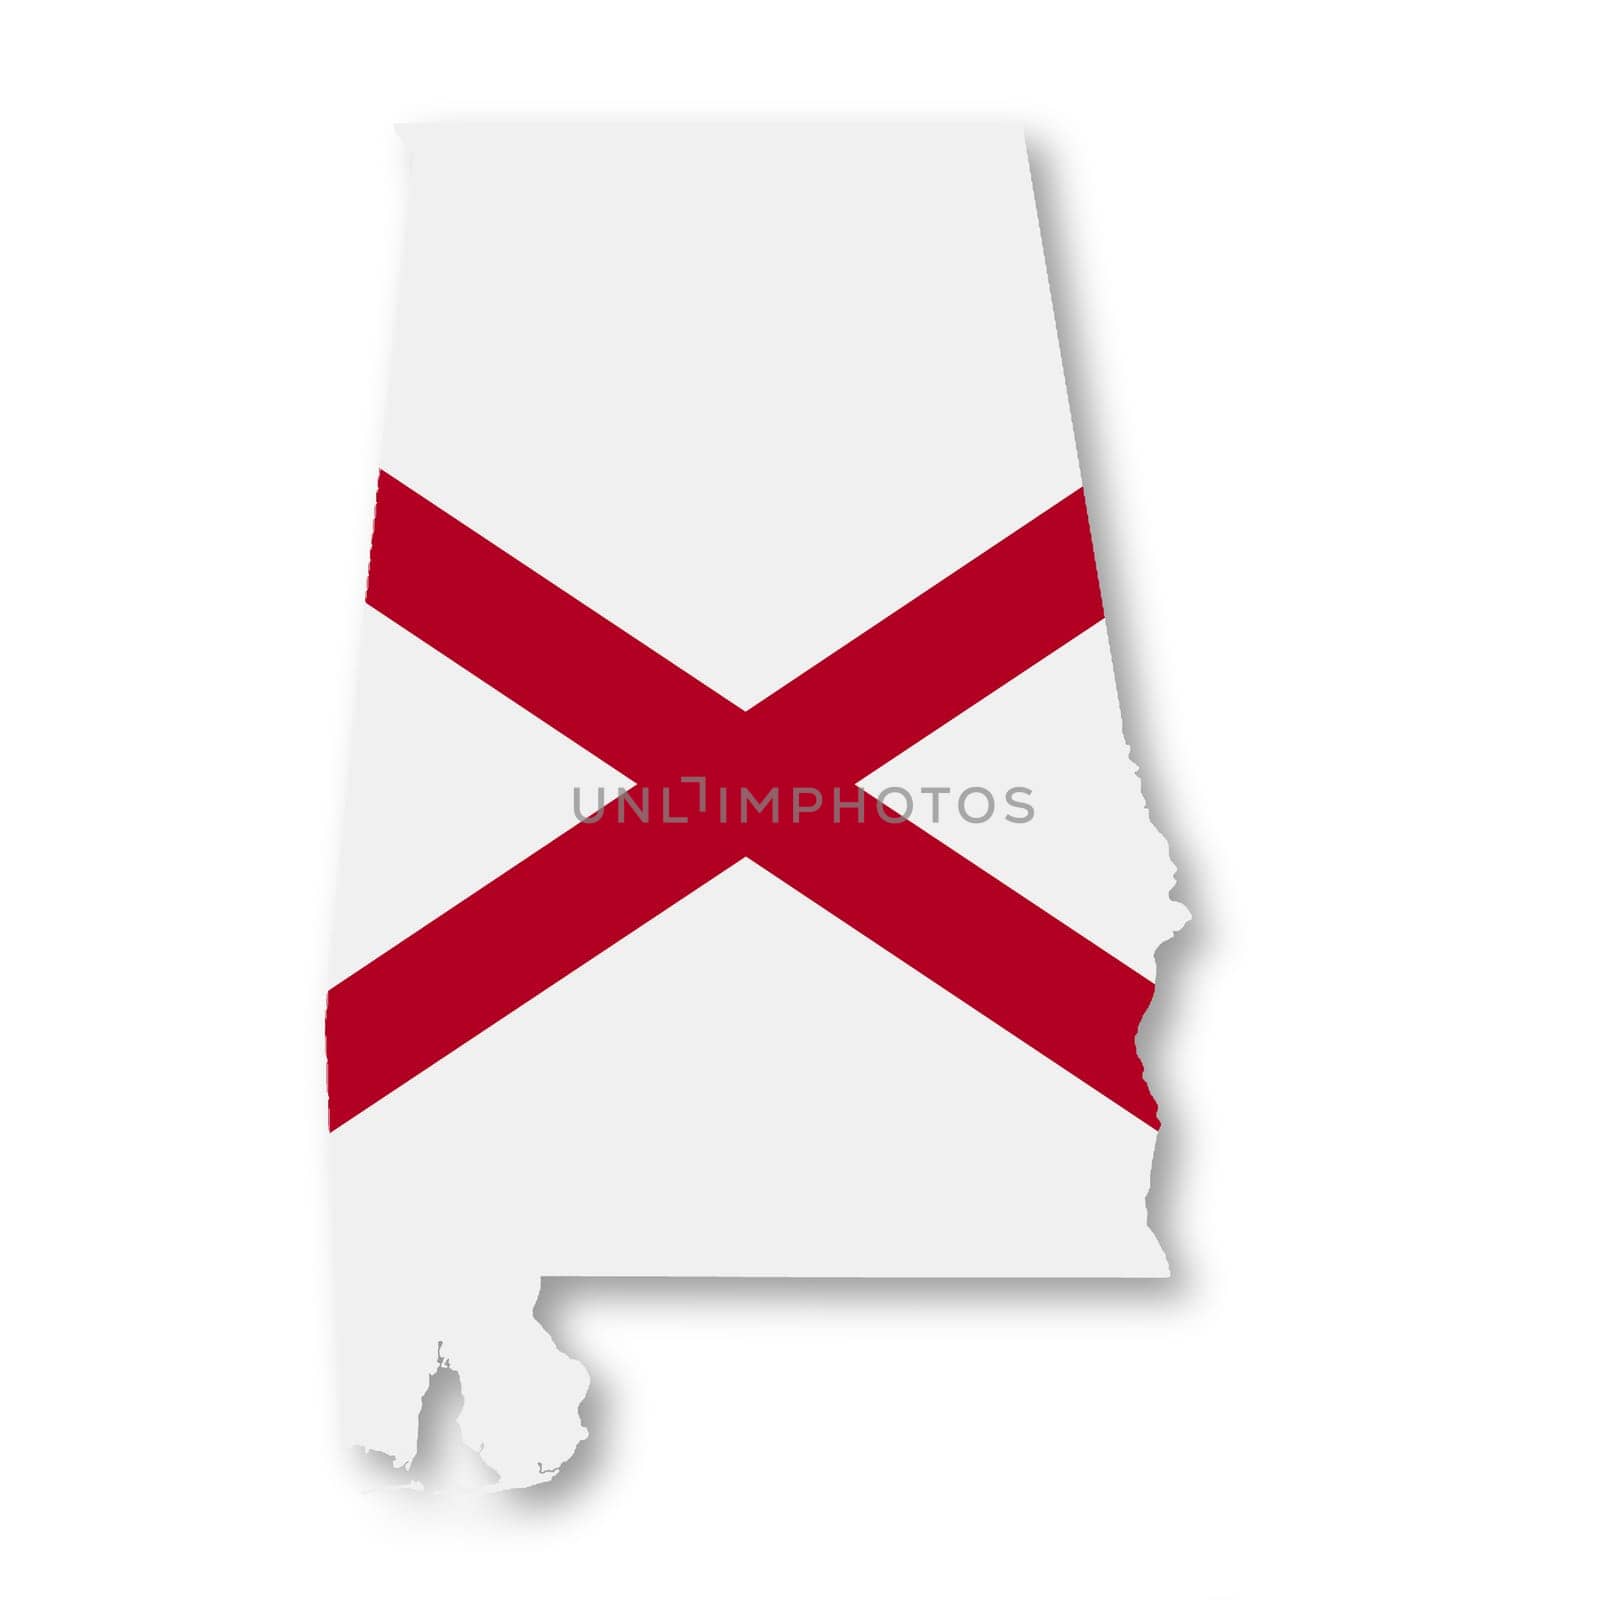 An Alabama State Flag Map Illustration with clipping path